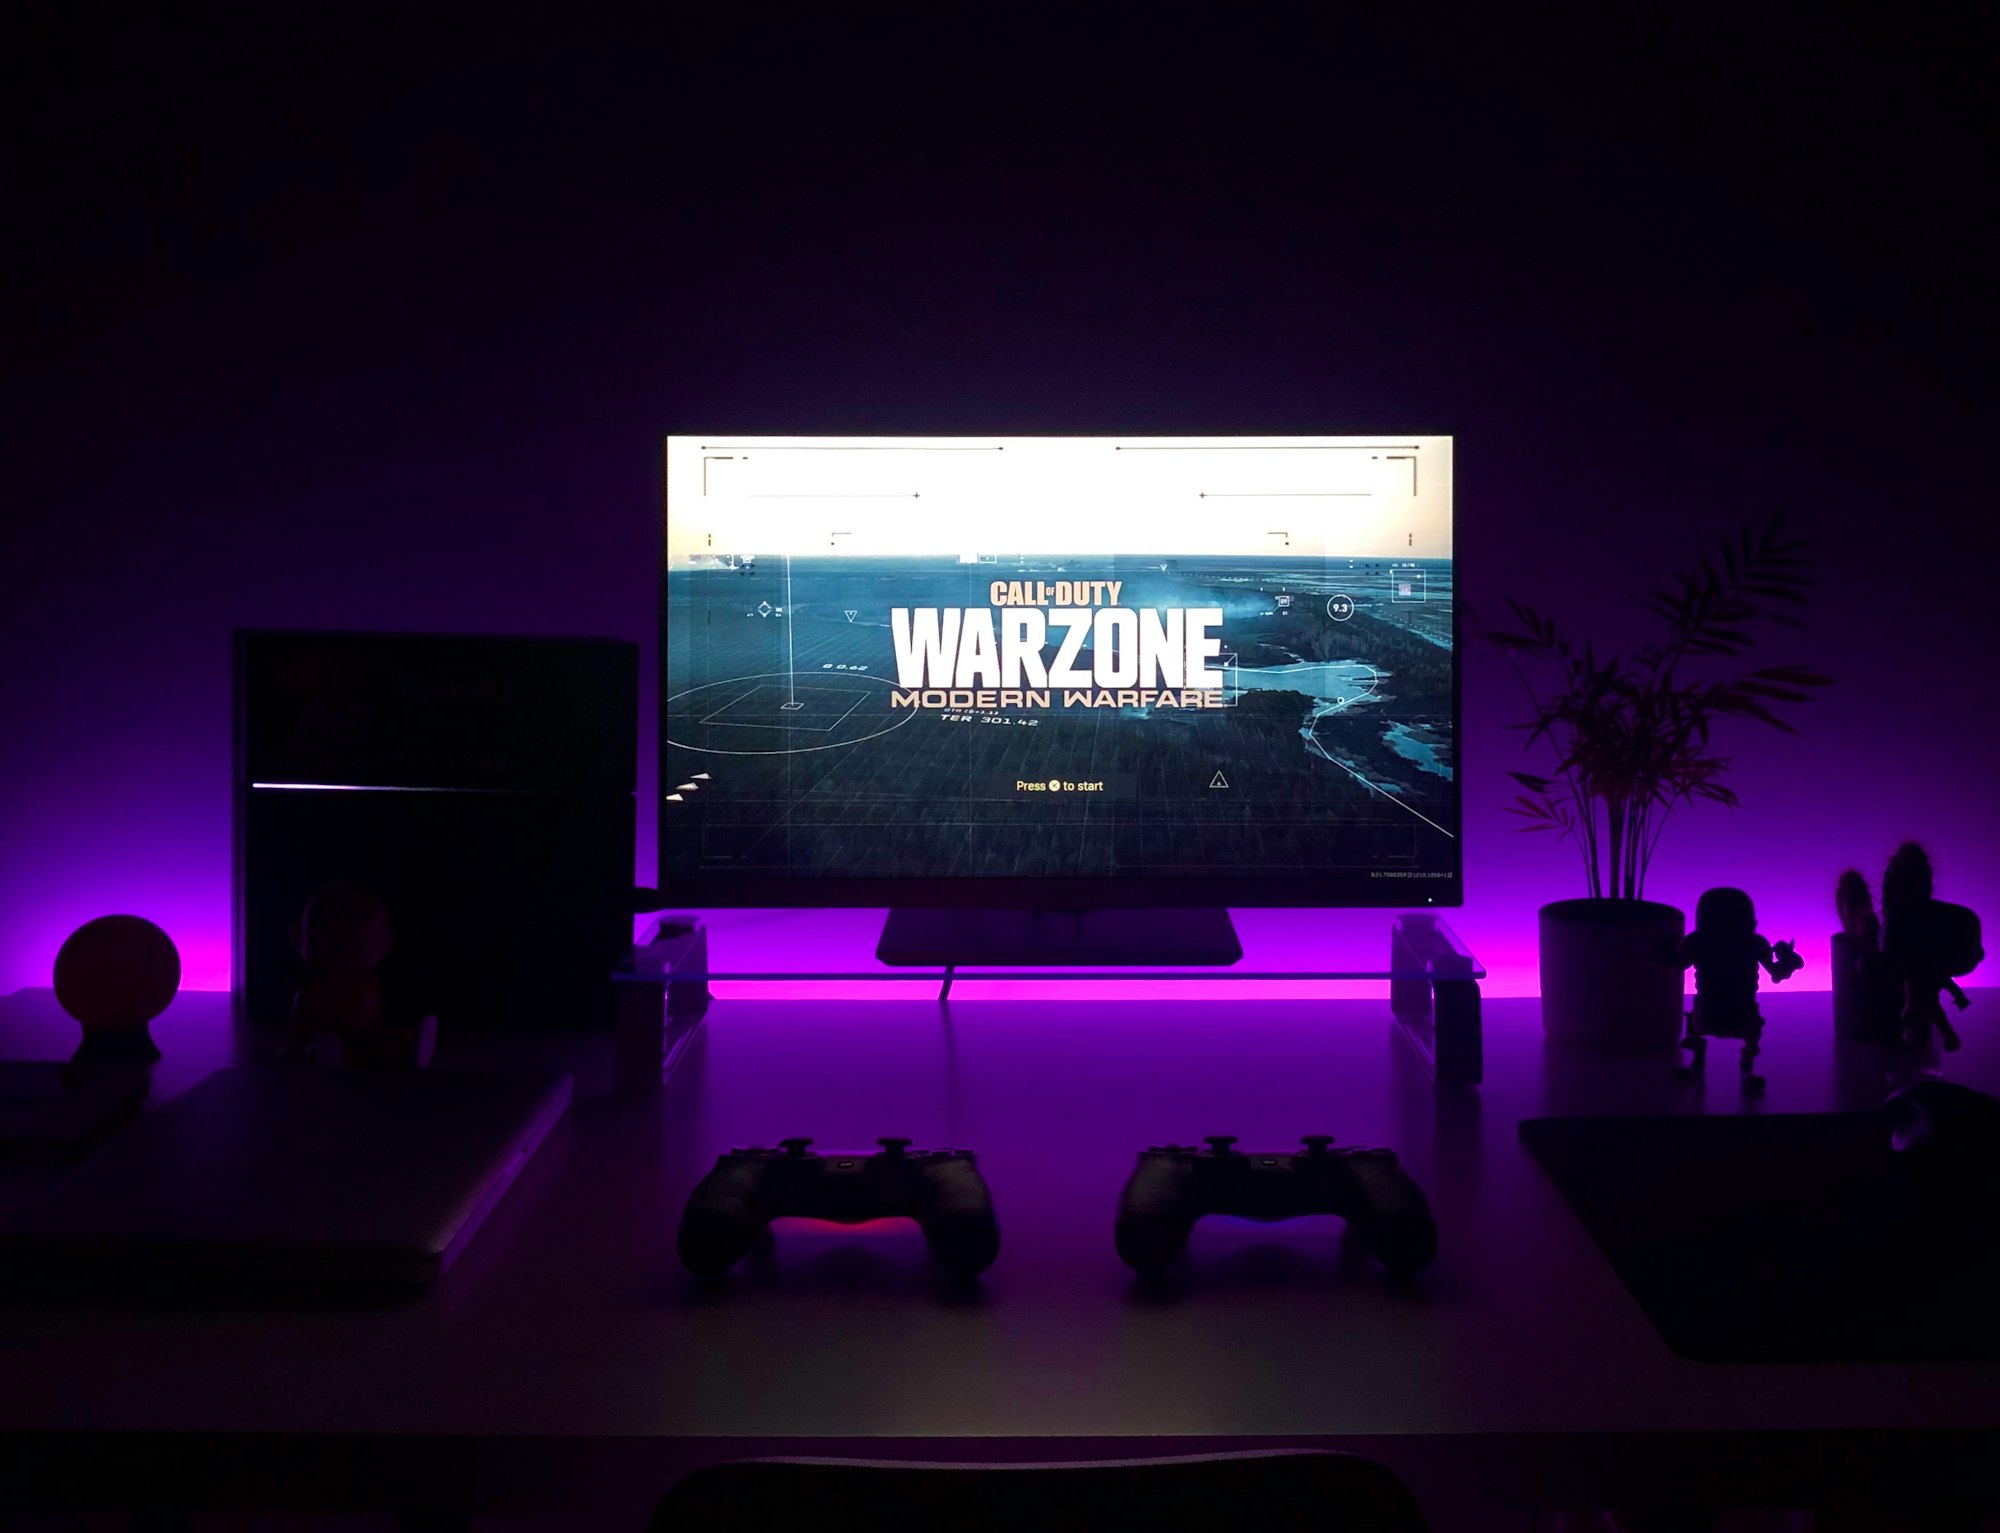 A screen sjpwomg a main menu screen for Call of Duty Warzone, with purple backlighting and two controllers